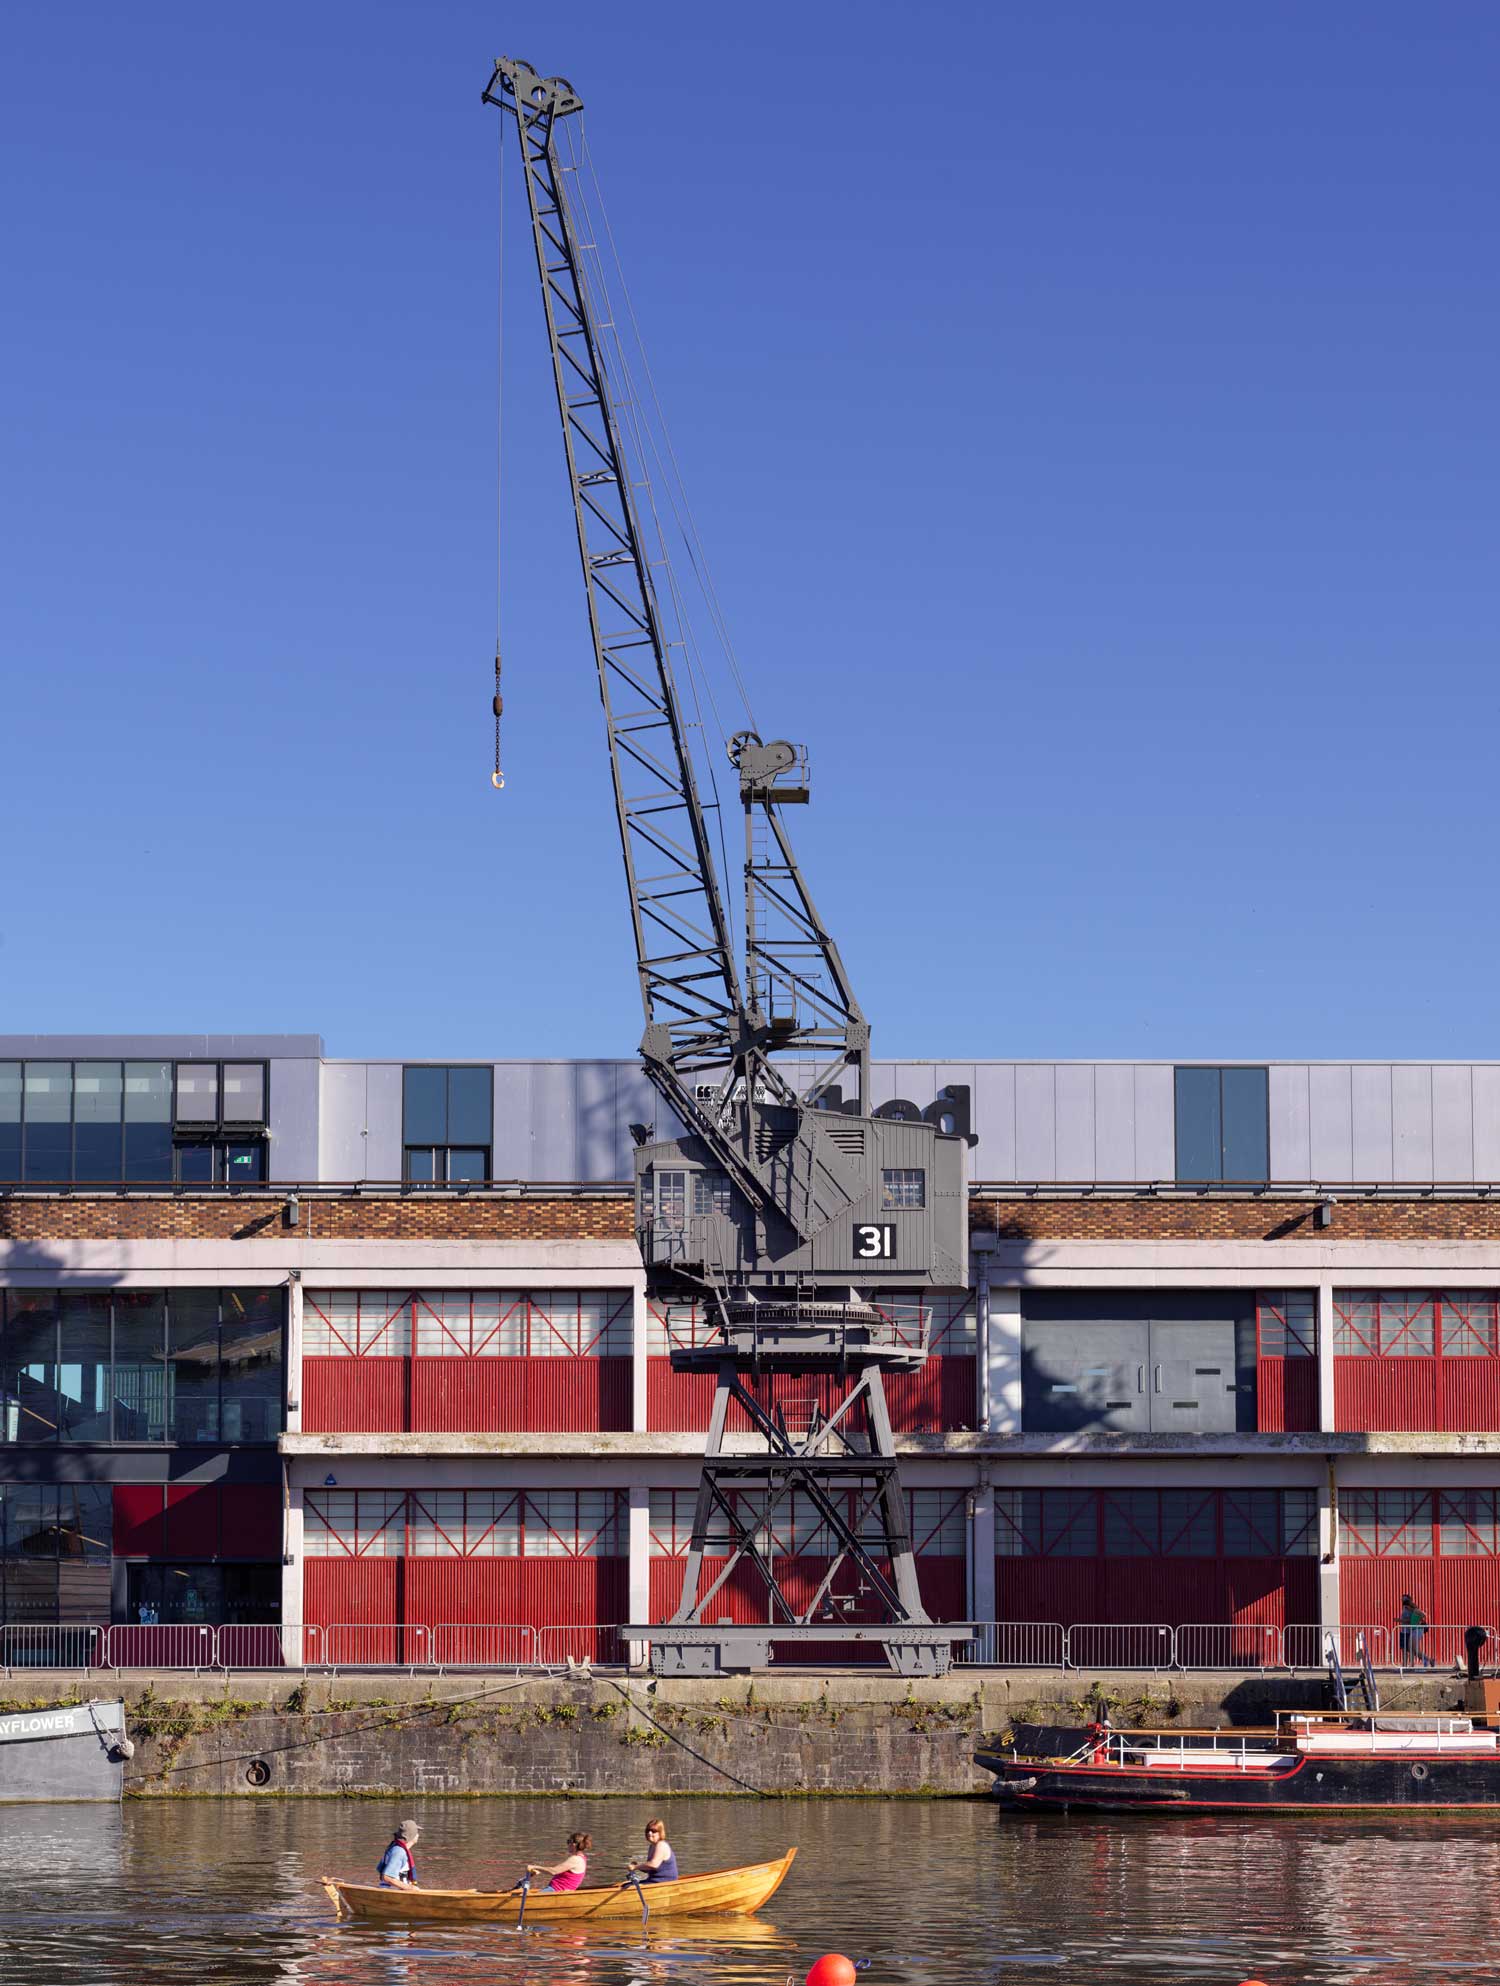 A photograph looking across a river to a large metal crane on the dockside, in front of an industrial building.